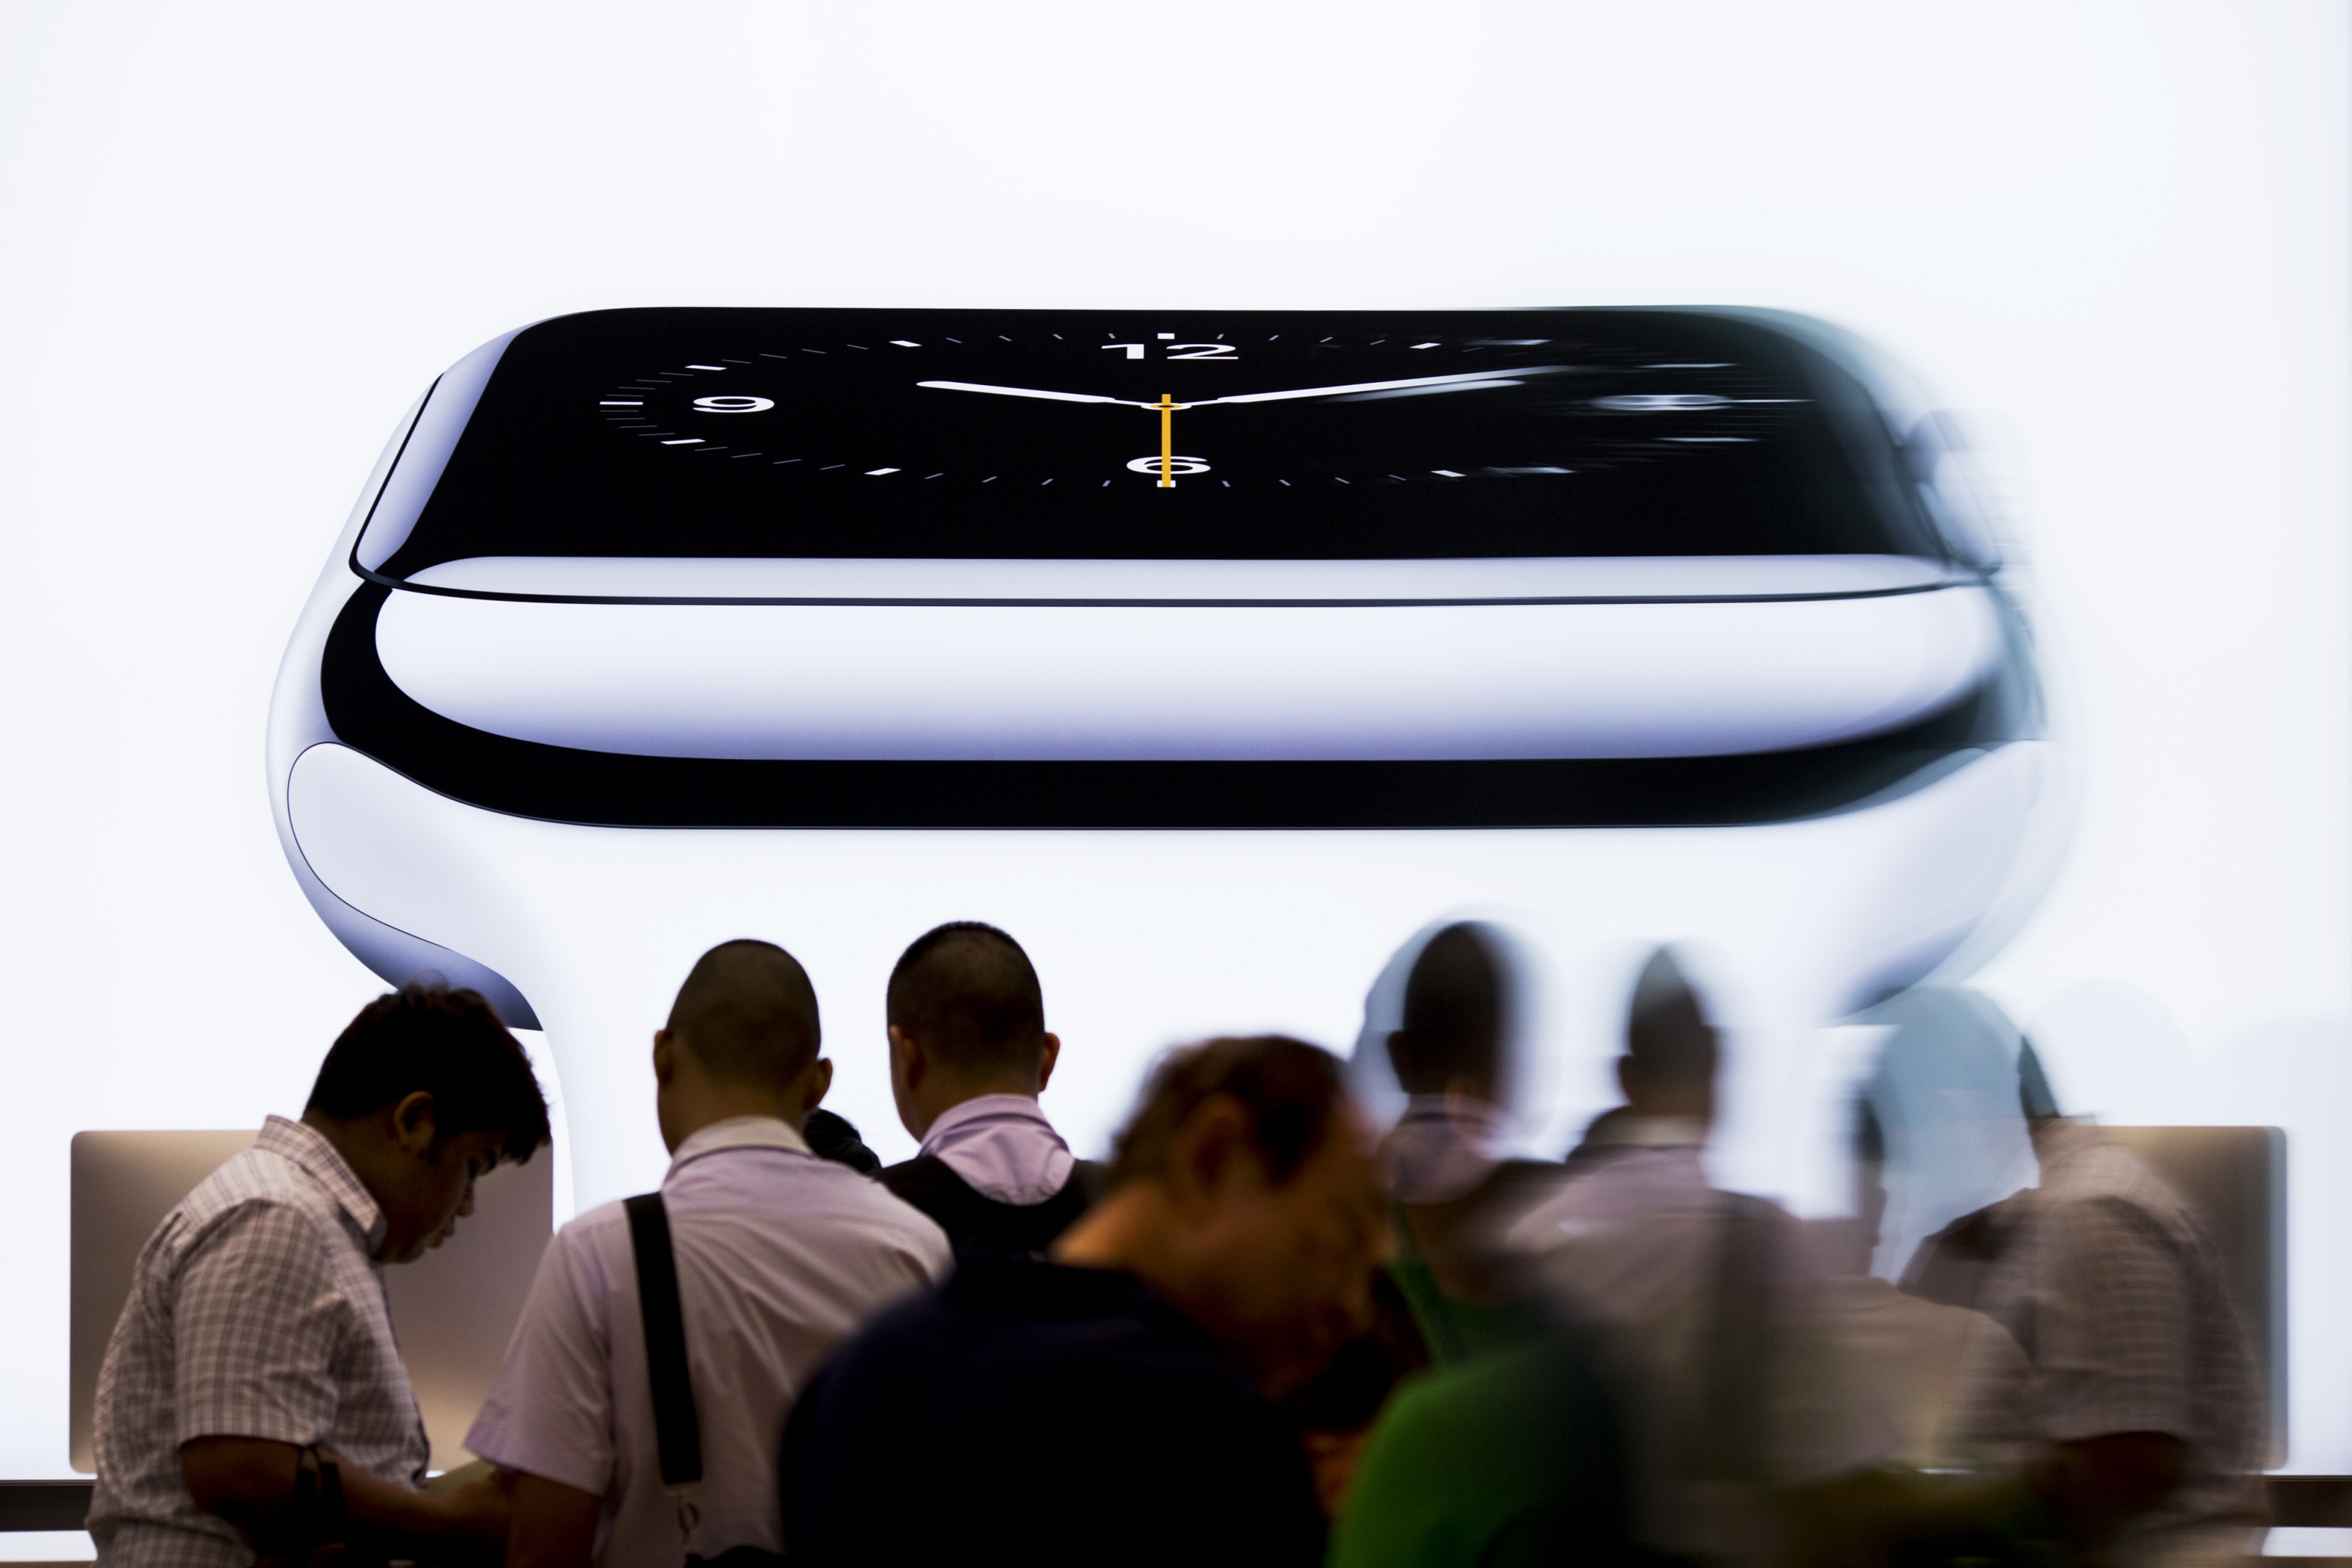 The Apple Watch retail launch in 2015.